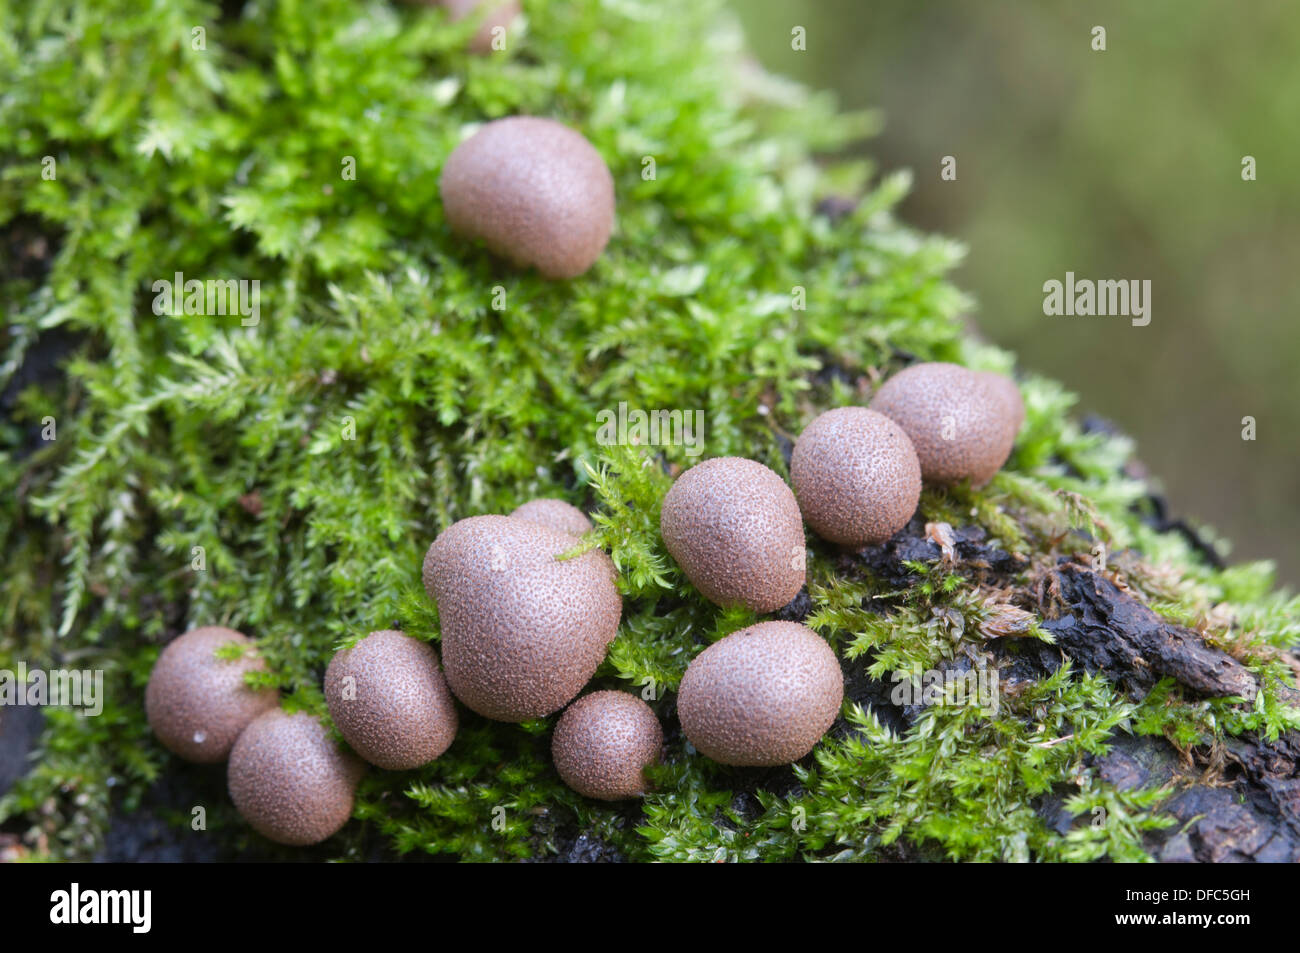 Mushrooms (slime mould Lycogala epidendrum) in a green moss Stock Photo